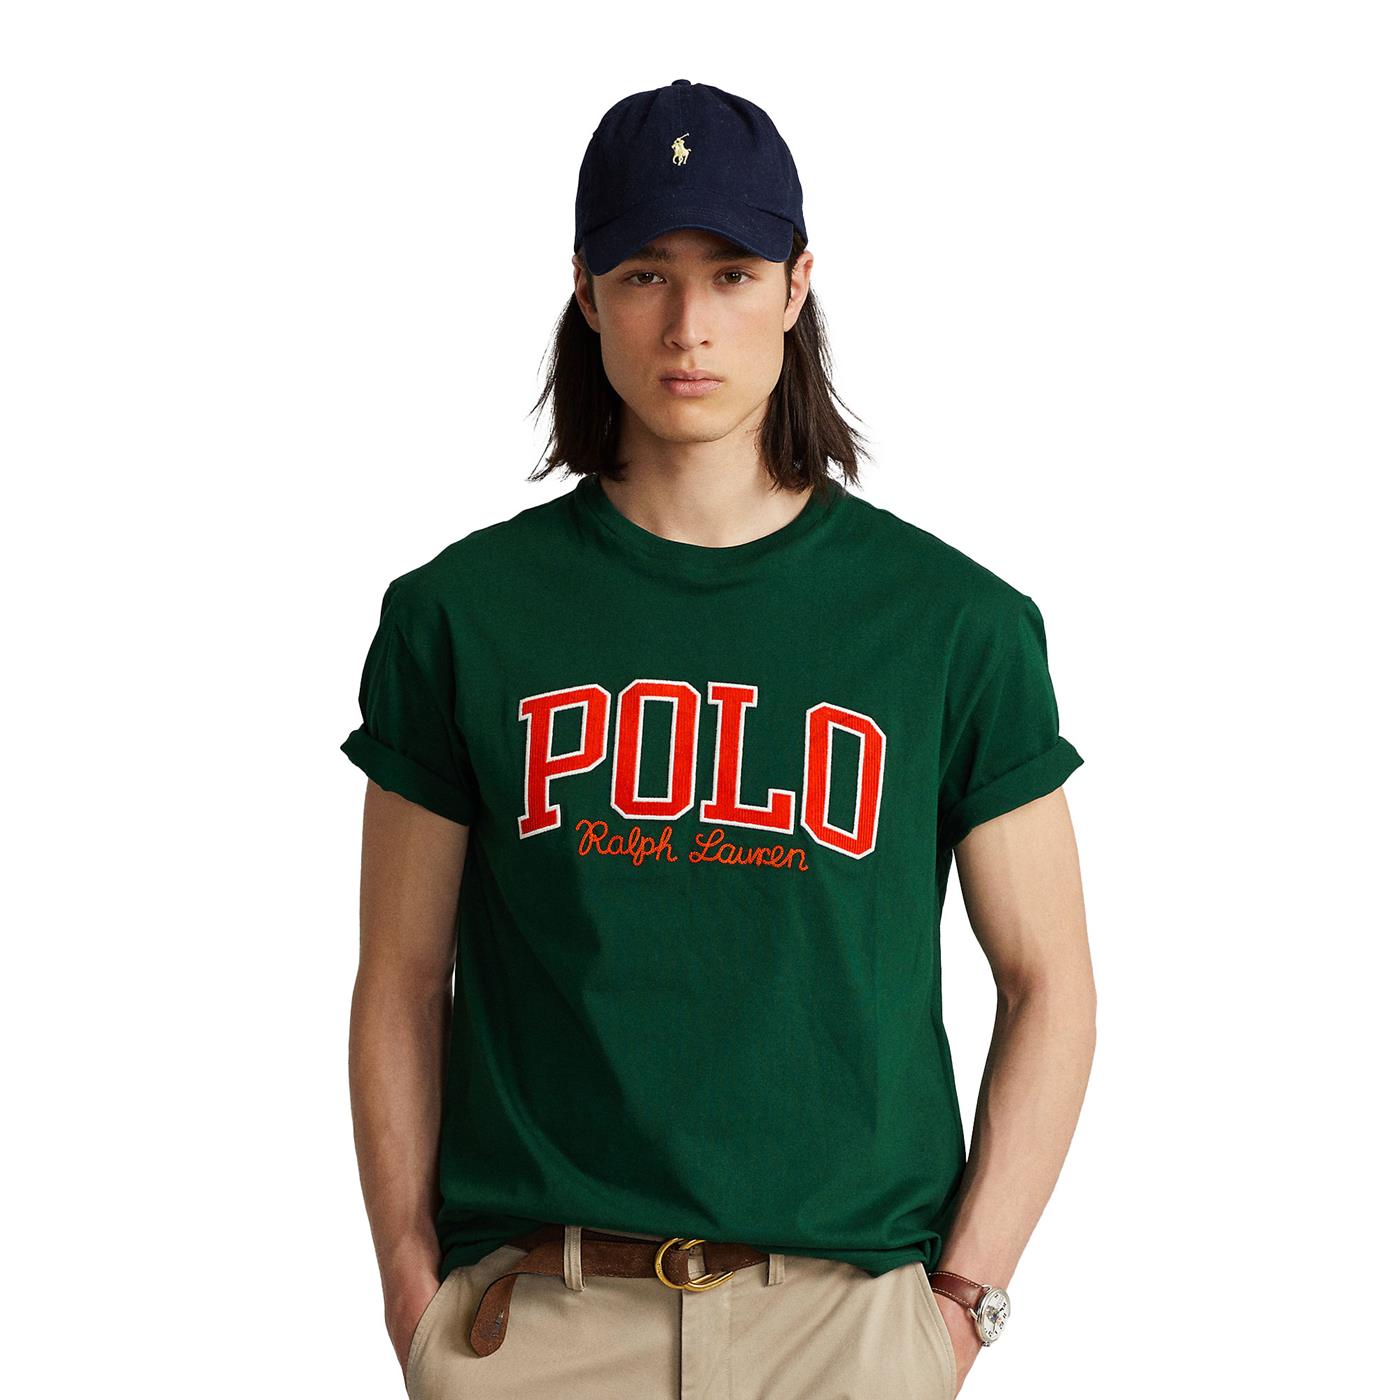 Shirt POLO RALPH LAUREN Classic Fit Logo Jersey T - Shirt Green for Man -  shoe-care polo-shirts XXl Phone Accessories | T - 710878616005 | RvceShops